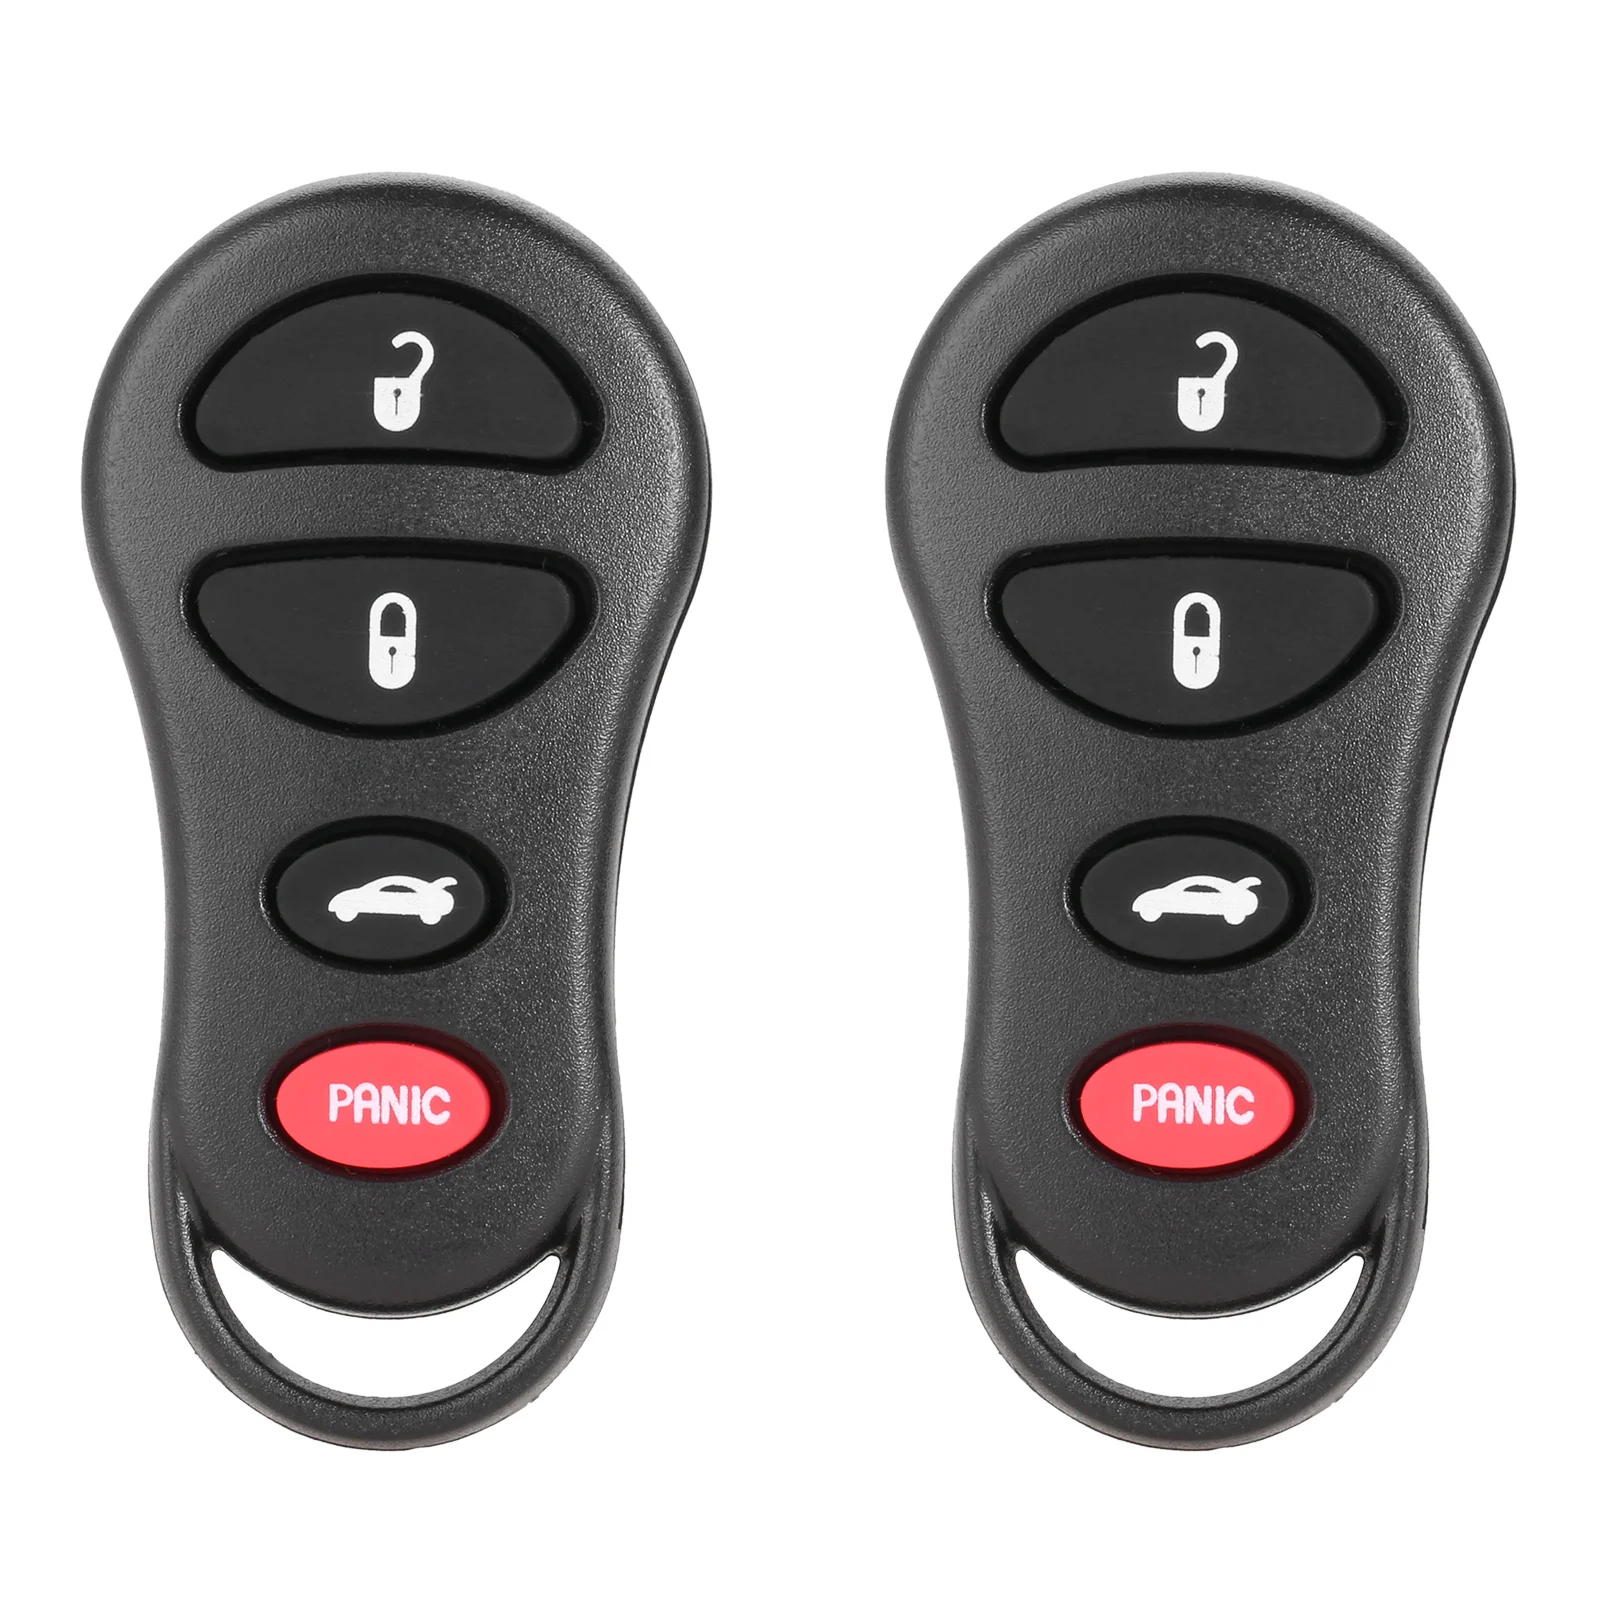 

2Pcs 315MHZ GQ43VT17T 4 Buttons Car Key Fob Keyless Entry Remote Control for Chrysler Dodge 2001 02 03 04 2005 Replace 04602260